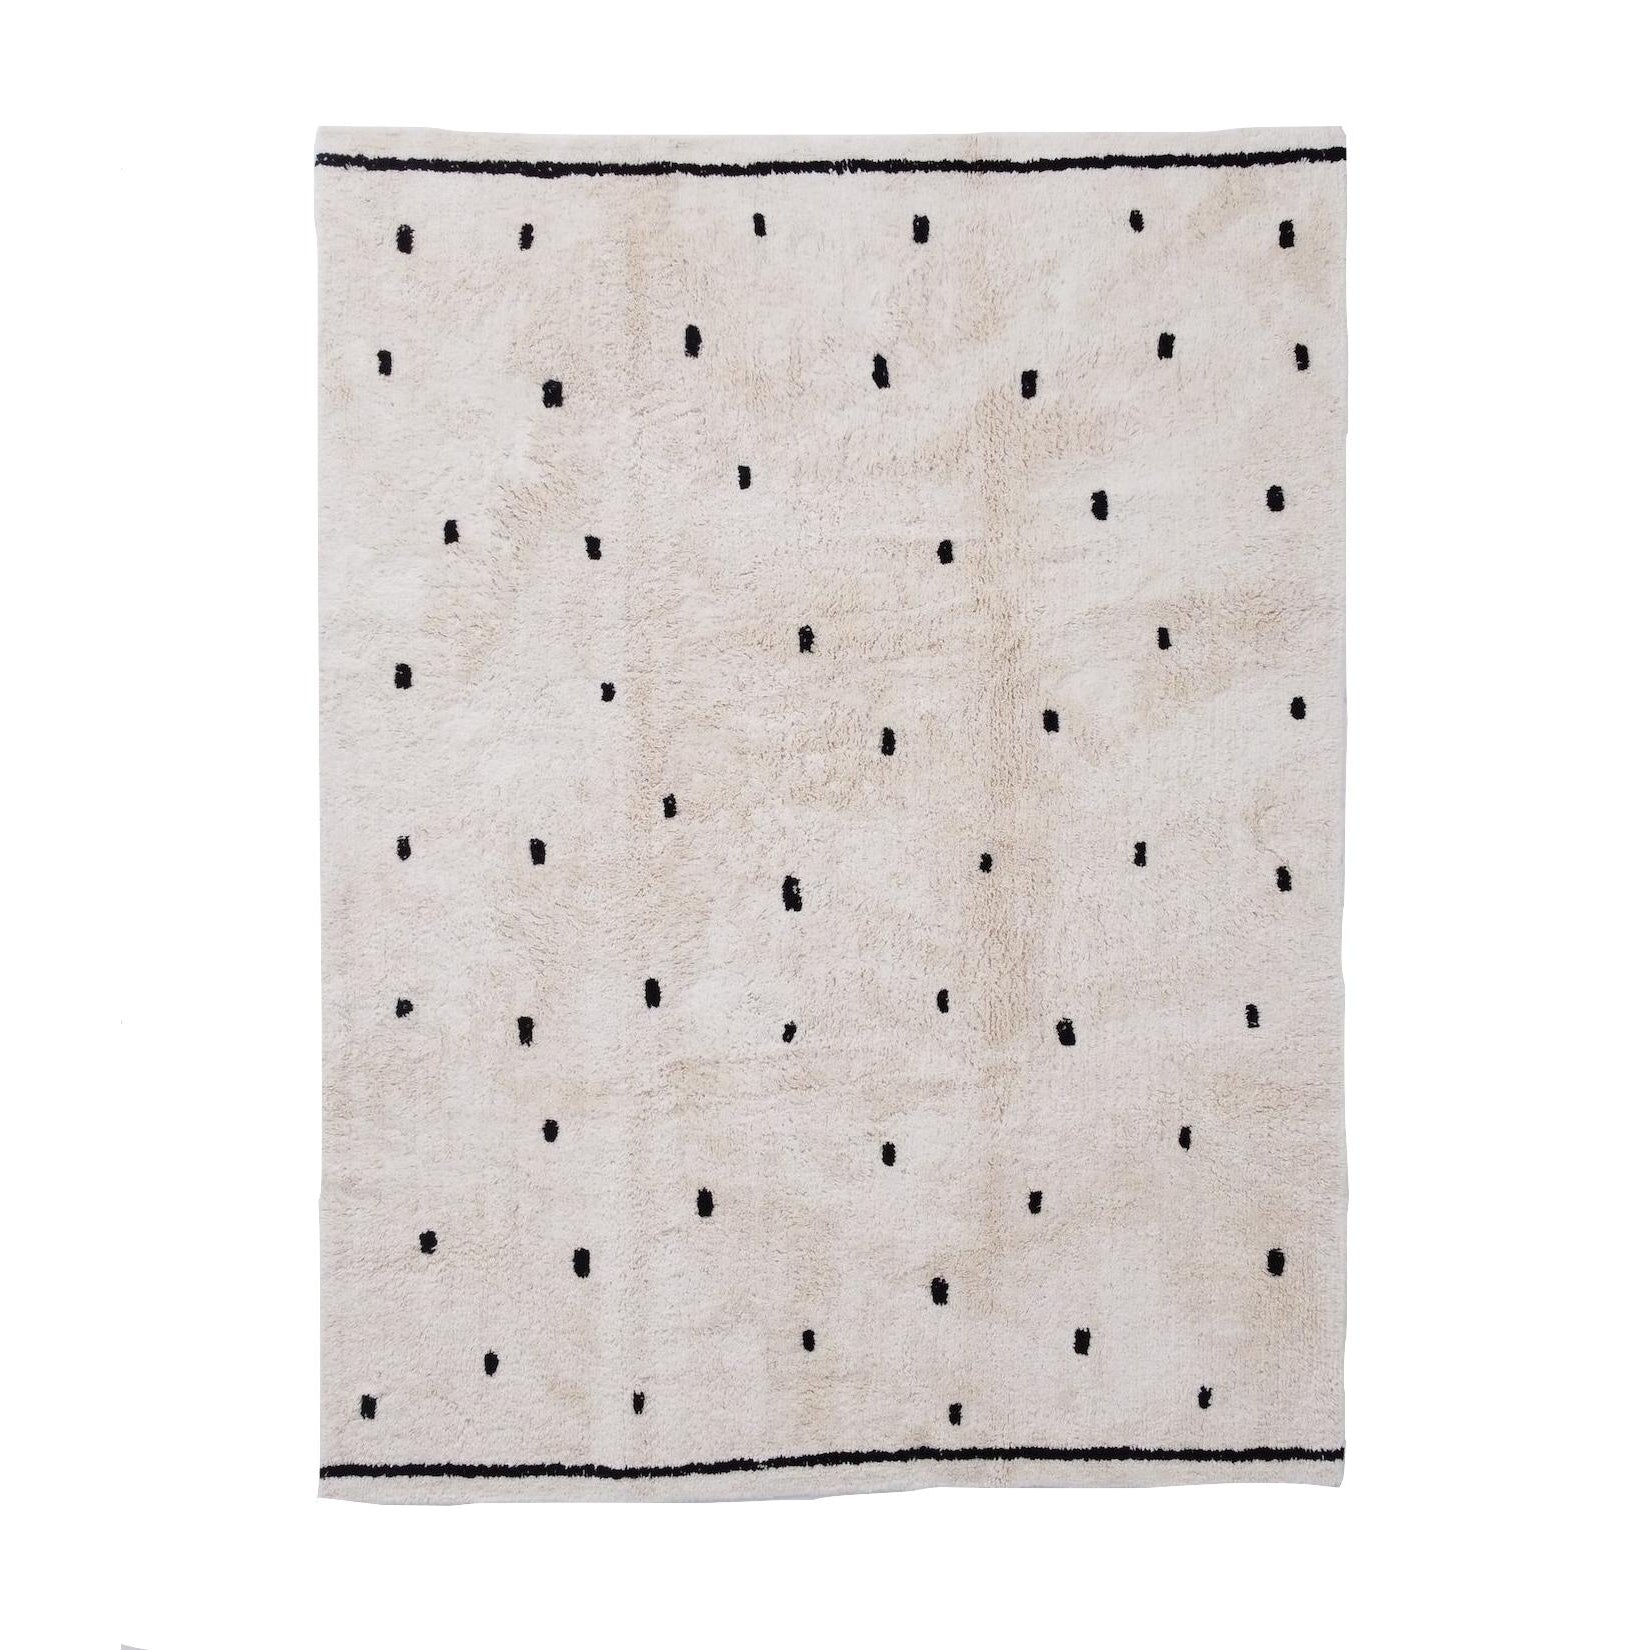 Linen Washable Sand Tan White 2 ft. 3 in. x 1 ft. 5 in. Small Mat Floor Mat  Area Rug